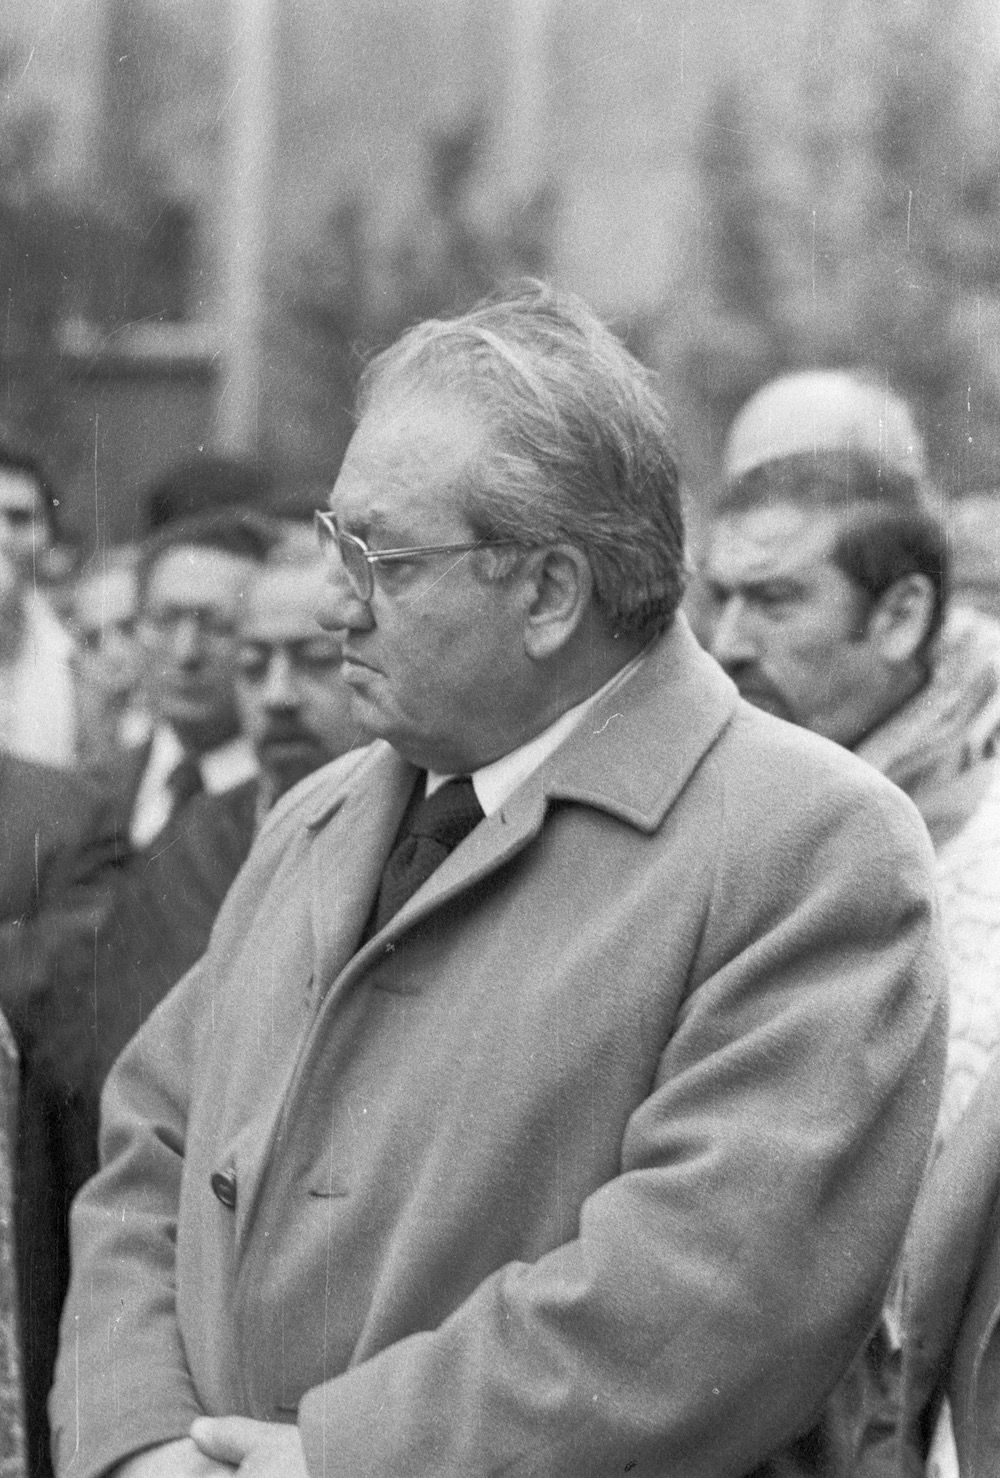 coll-vheloyan-defile-24avril1976-0007 - Année: 1976